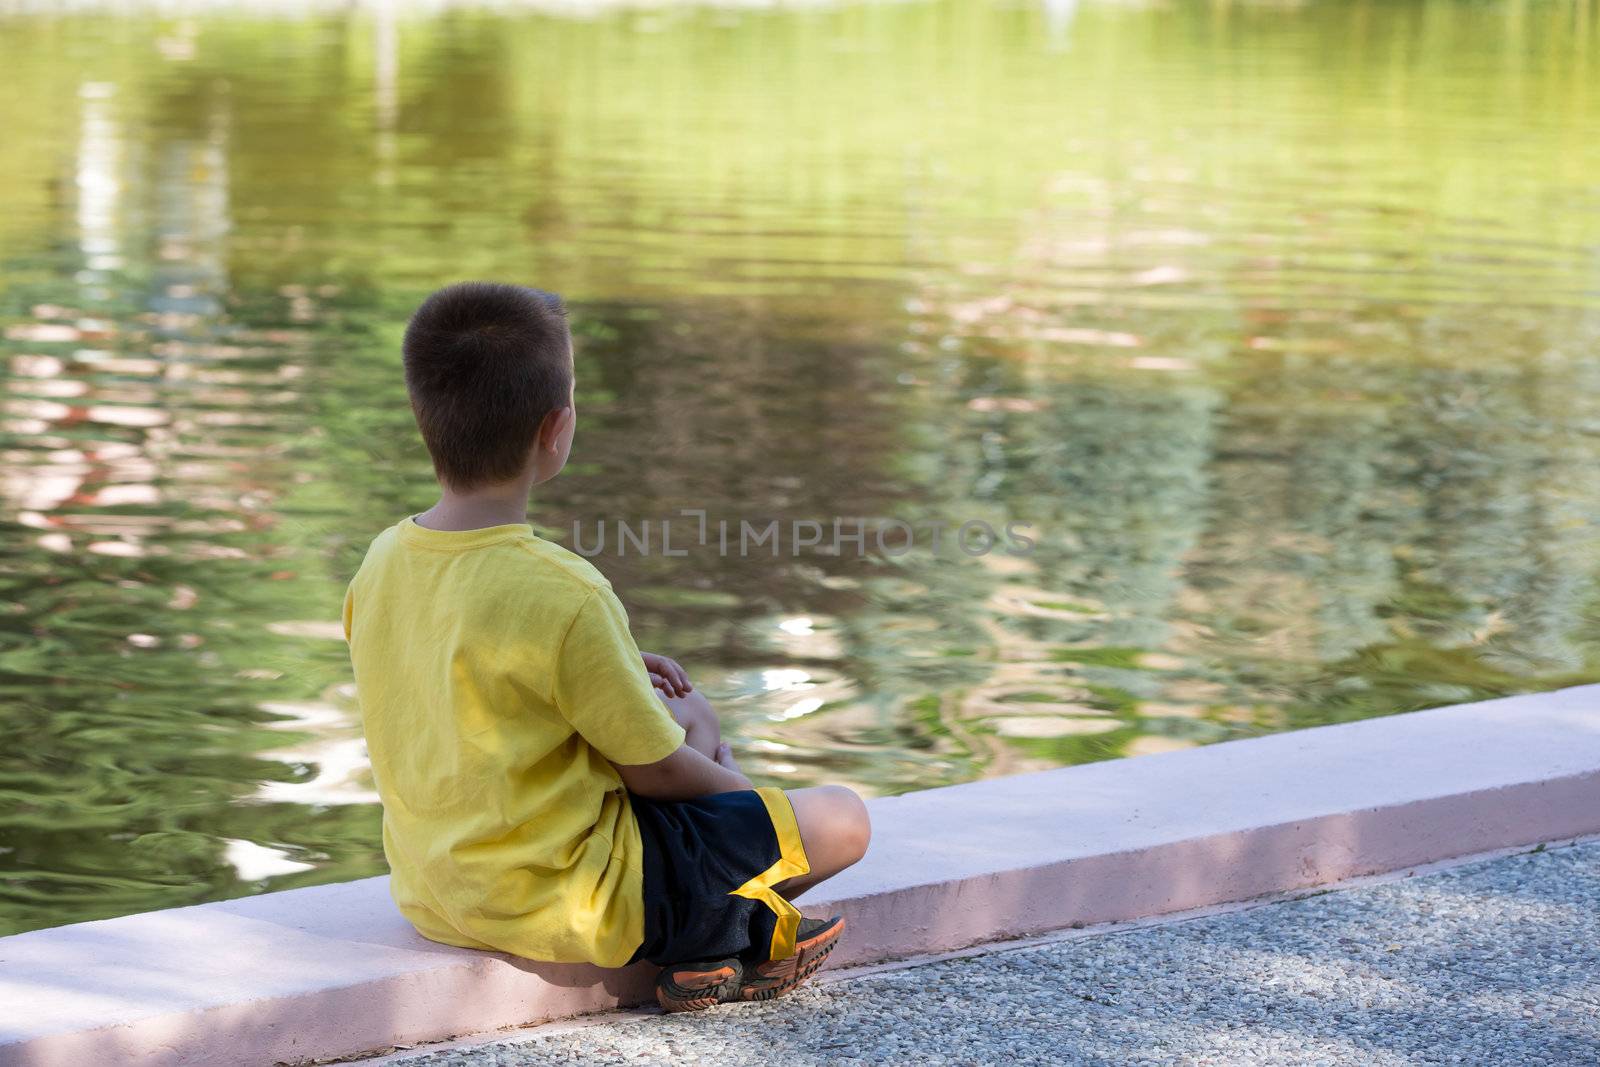 He is alone or lonely, seven years old kid looking at calm water while in deep thoughts.